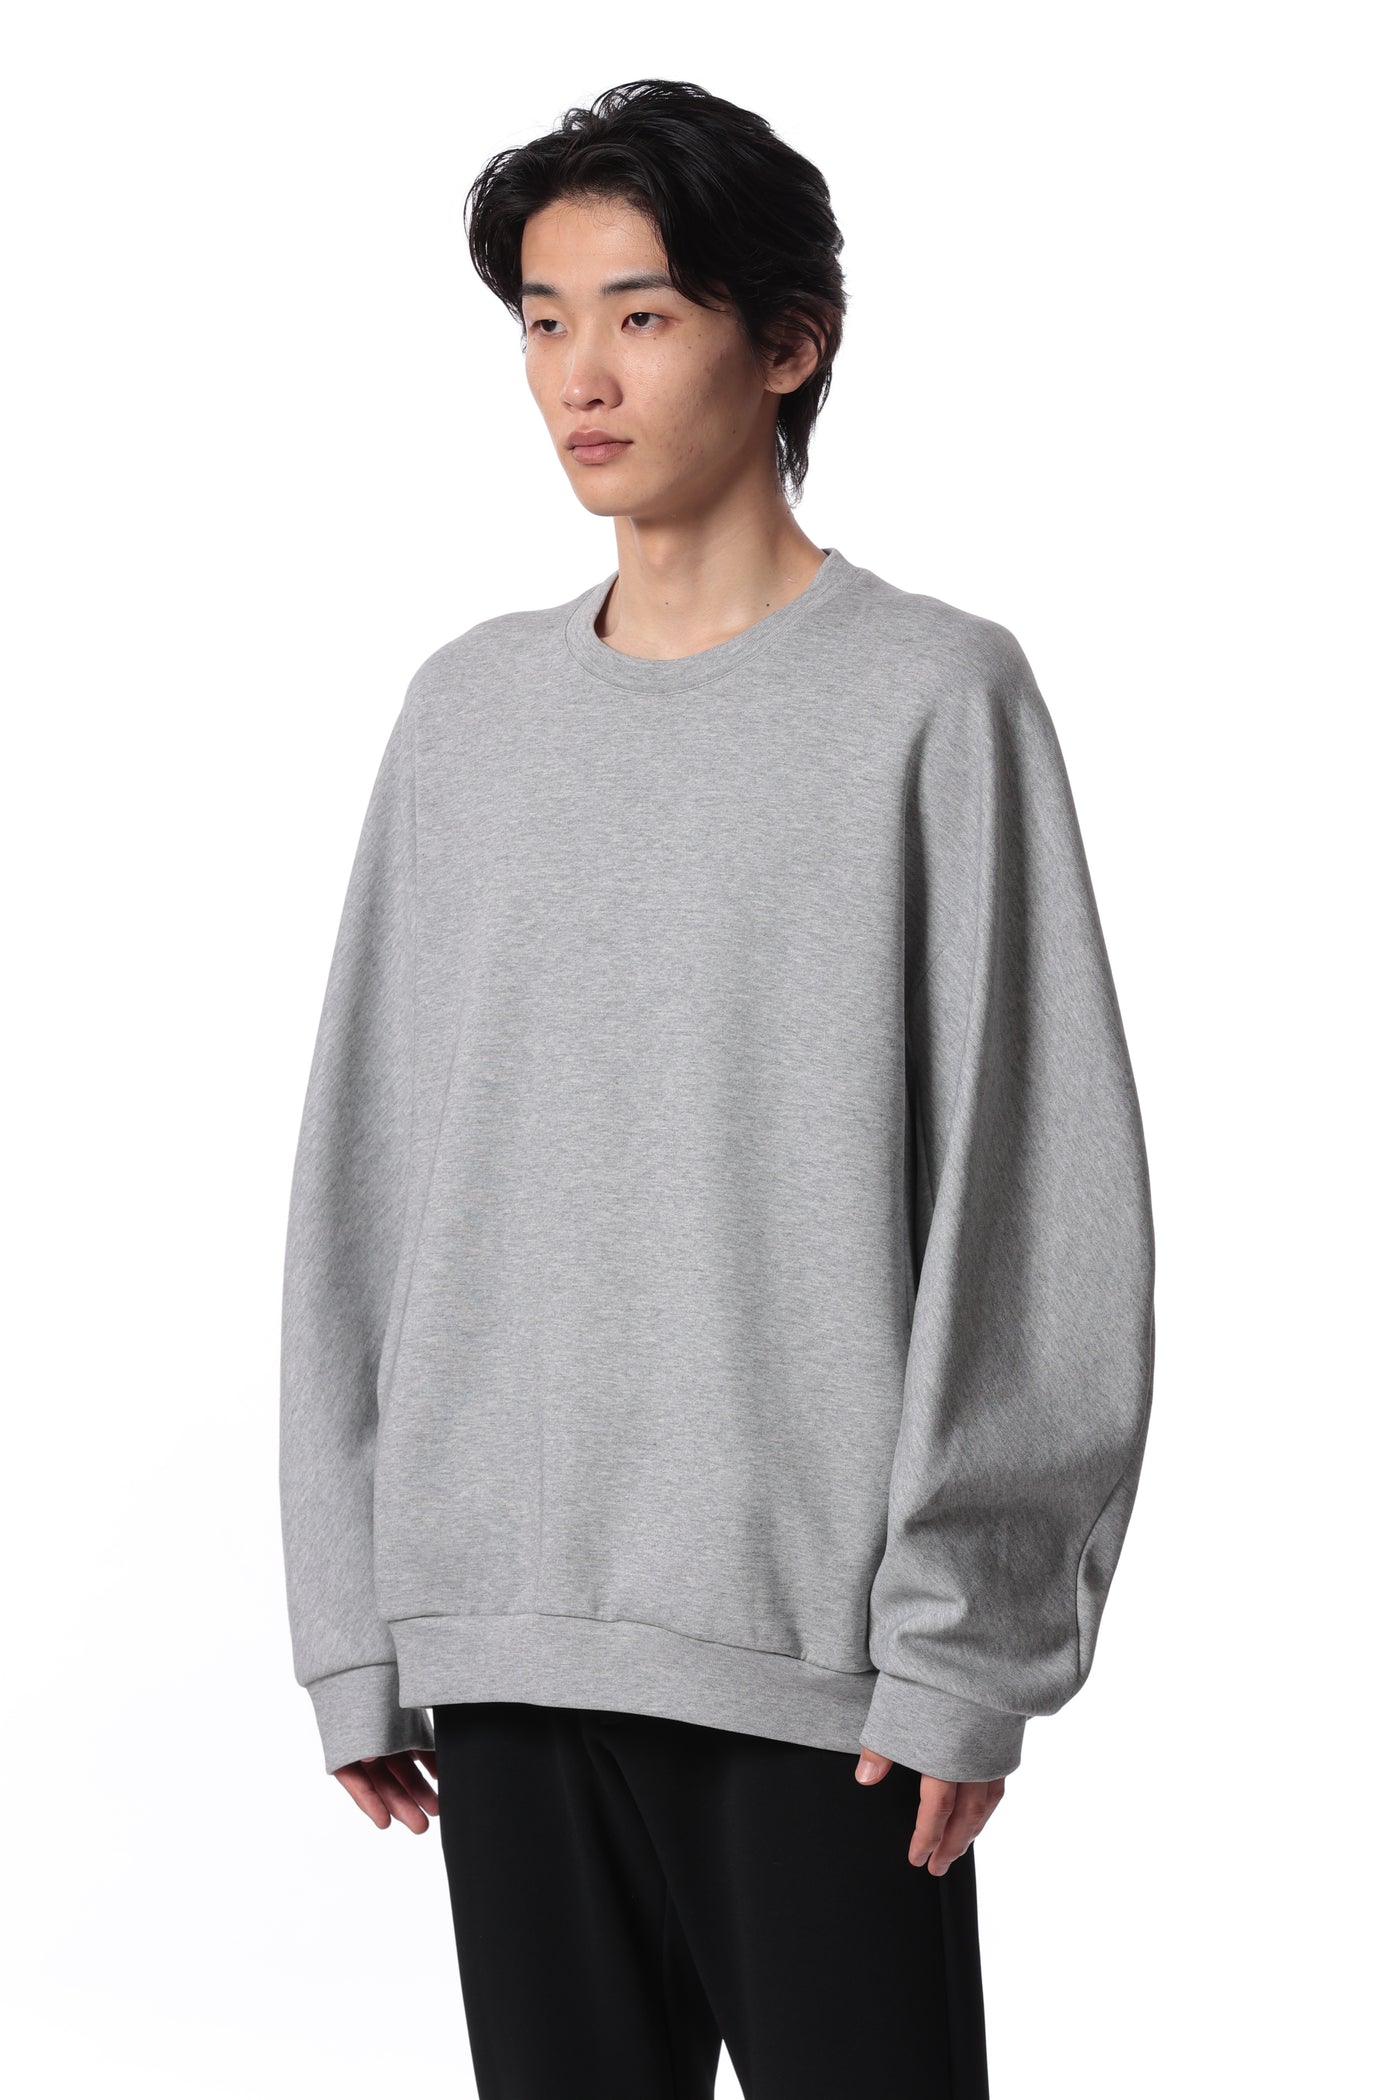 Released in February AJ41-024 Cotton/Polyester Double Knit Pullover Sweatshirt